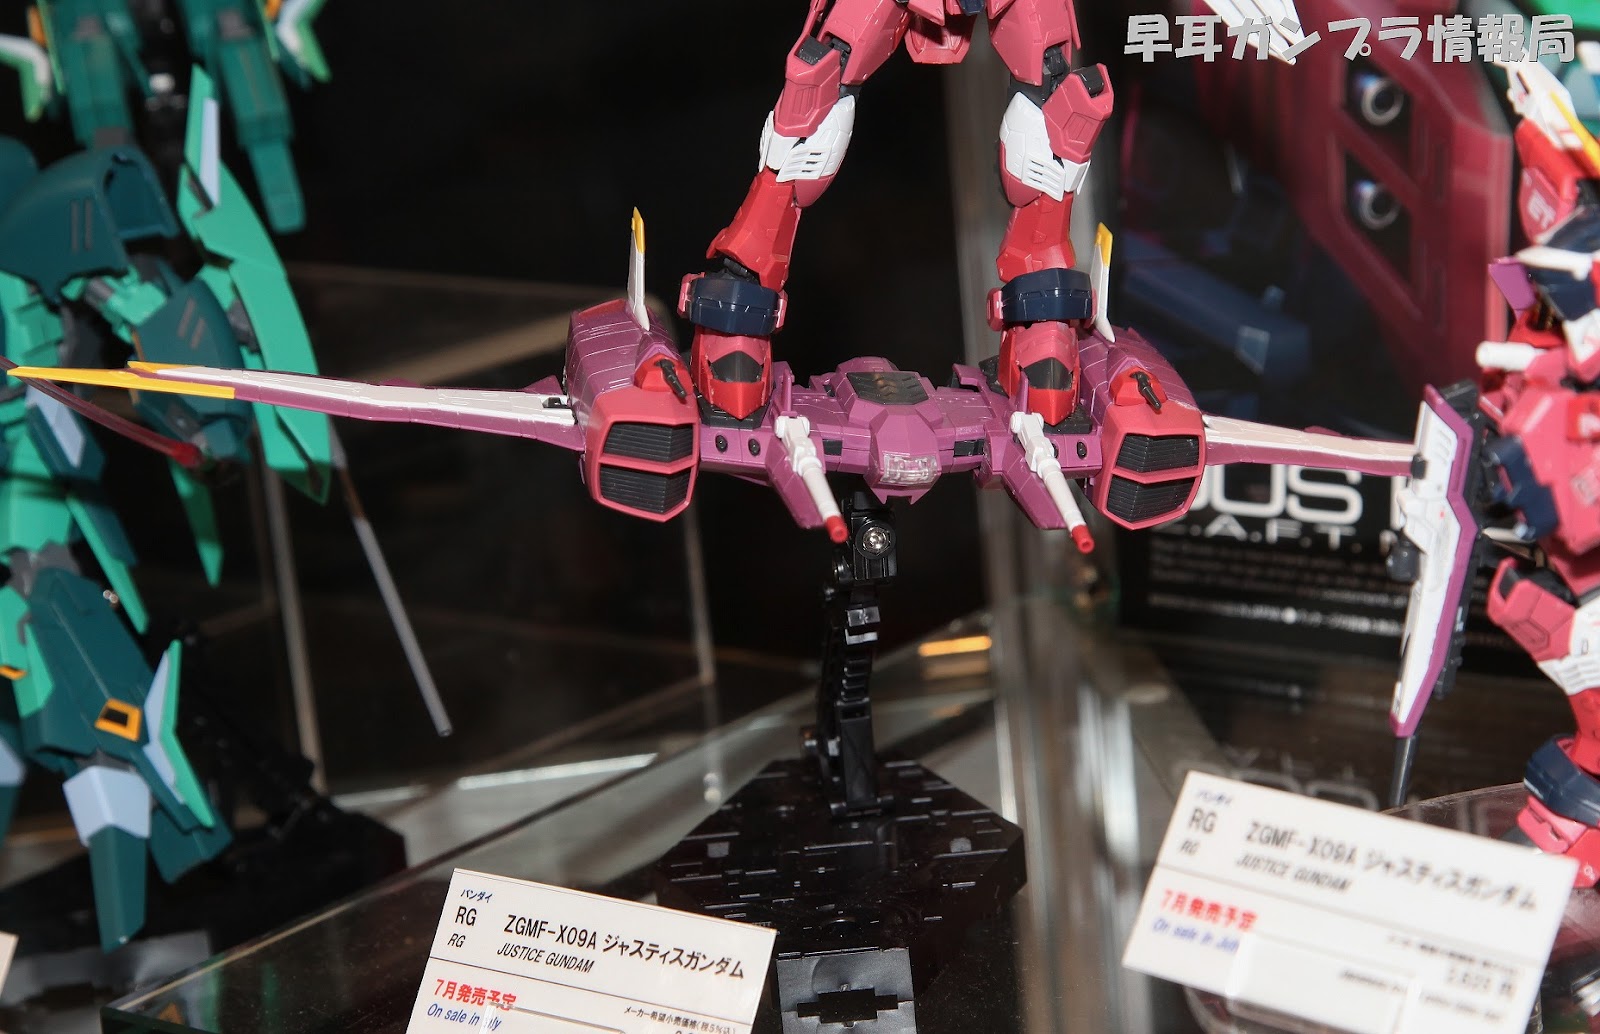 ... RG 1/144 Justice Gundam - Wallpaper Size Images @ Tokyo Toy Show 2012